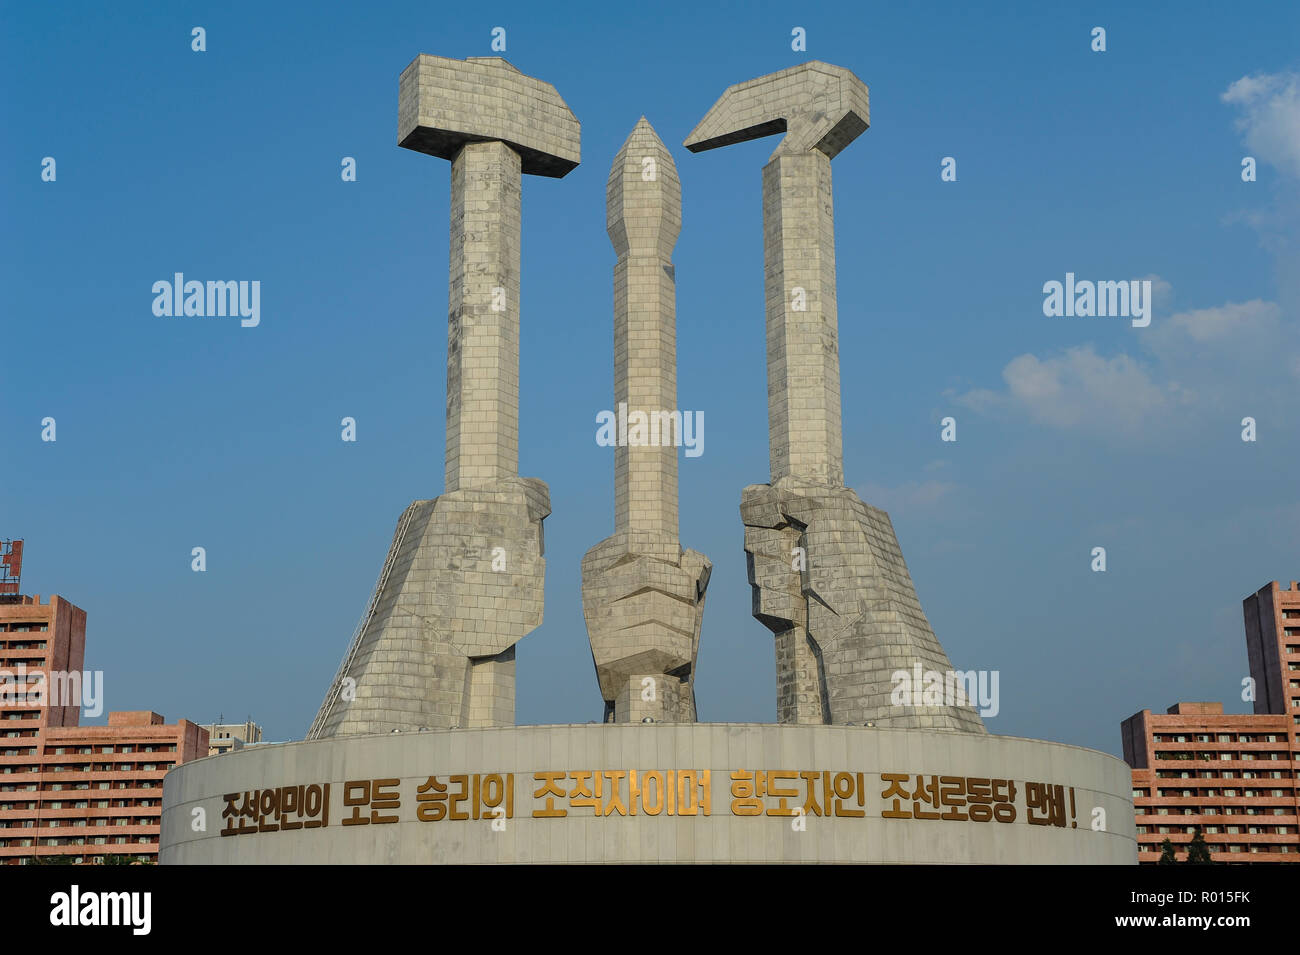 Pjoengjang, North Korea, Monument to the Foundation of the Workers' Party of Korea Stock Photo